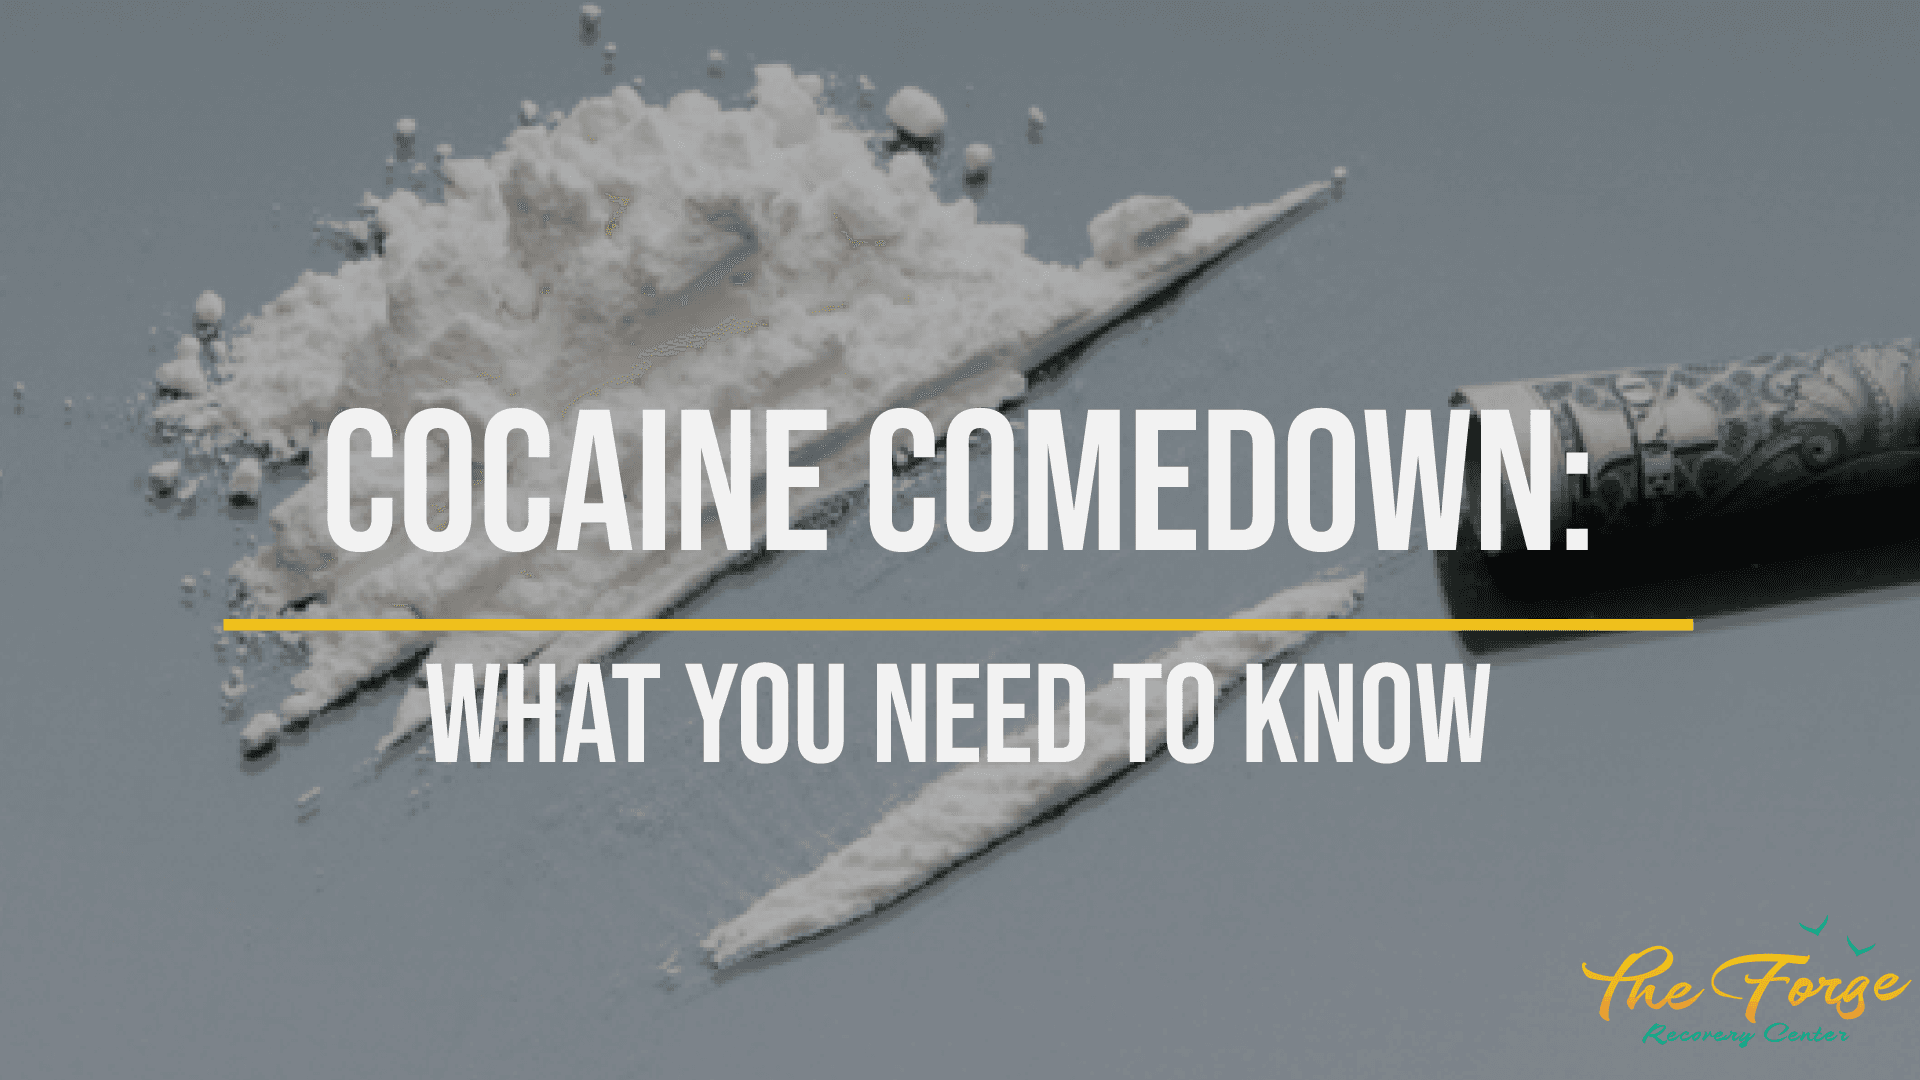 Cocaine Comedown: The Side of Cocaine Abuse Nobody Talks About